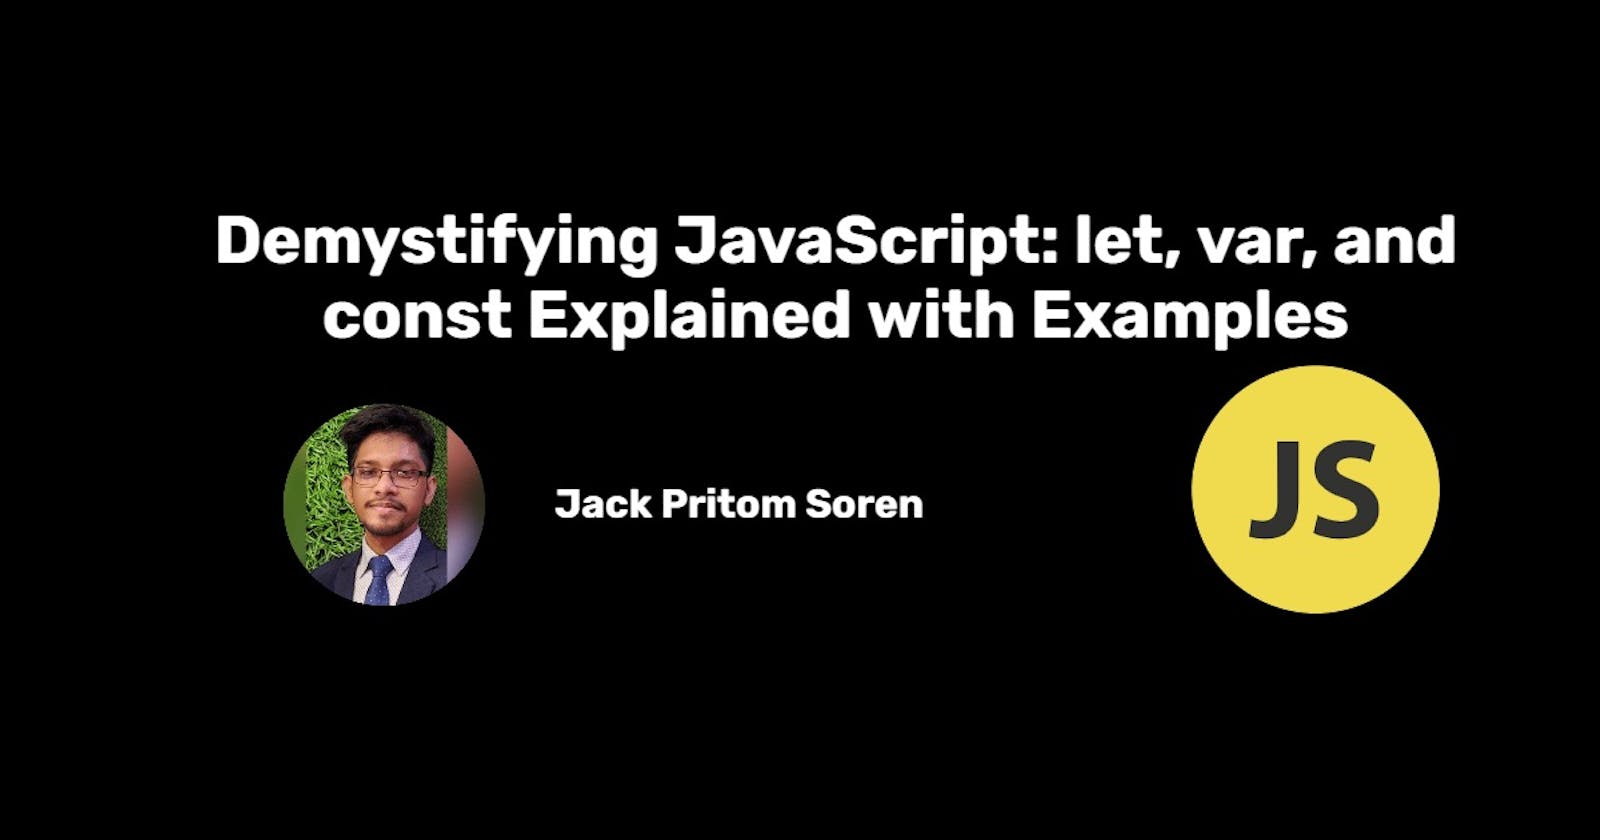 Demystifying JavaScript: let, var, and const Explained with Examples